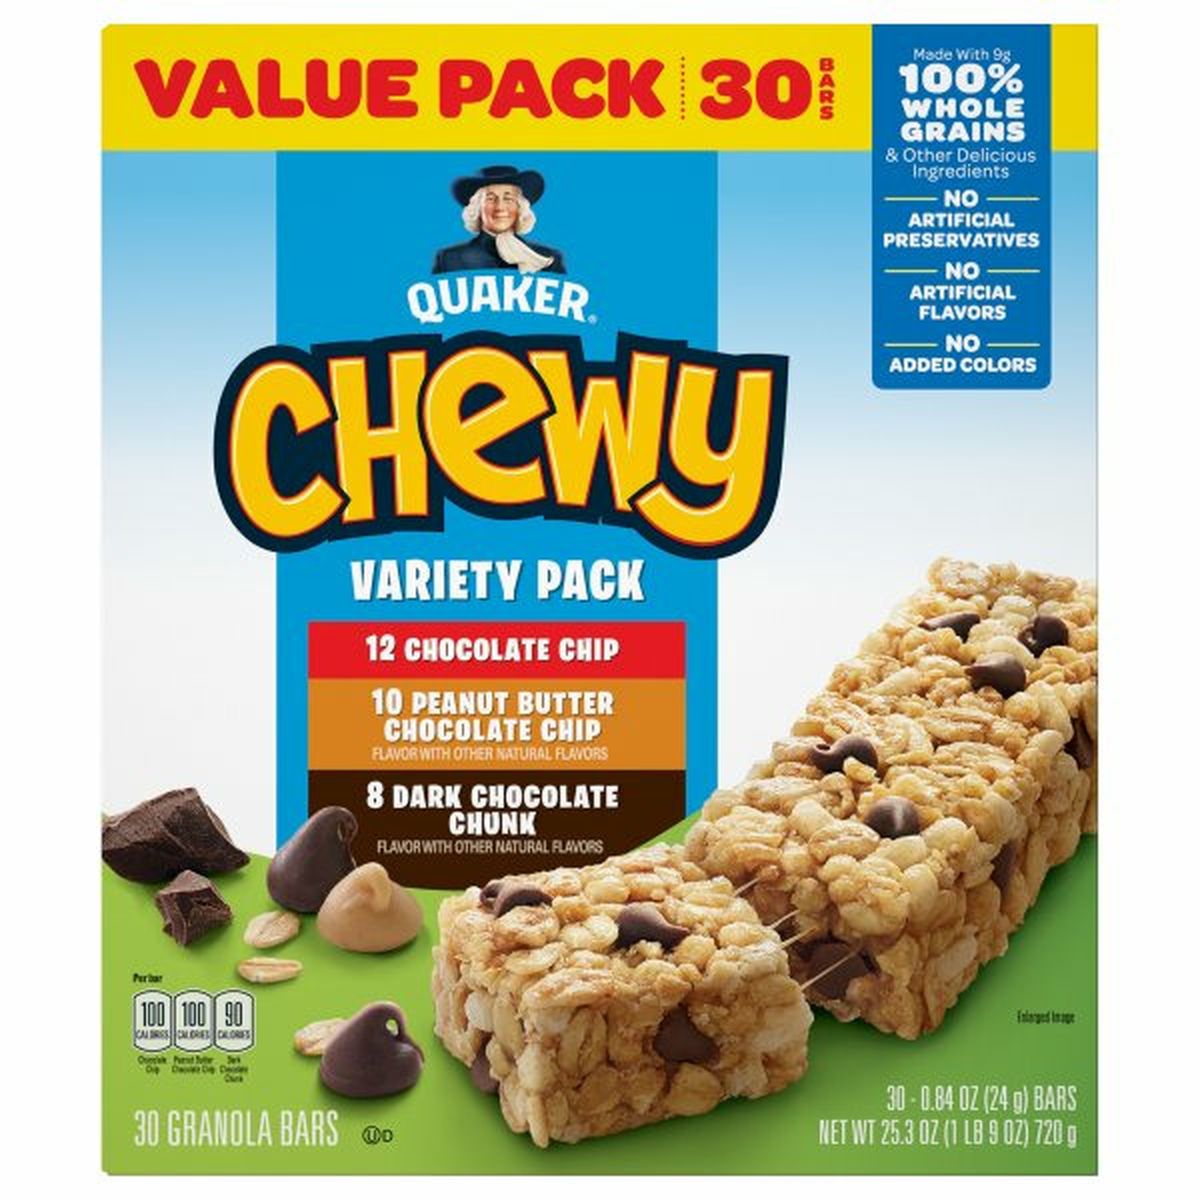 Calories in Quaker Chewy Granola Bars, Chocolate Chip/Peanut Butter Chocolate Chip/Dark Chocolate Chunk, Value Pack, Variety Pack, 30 Pack